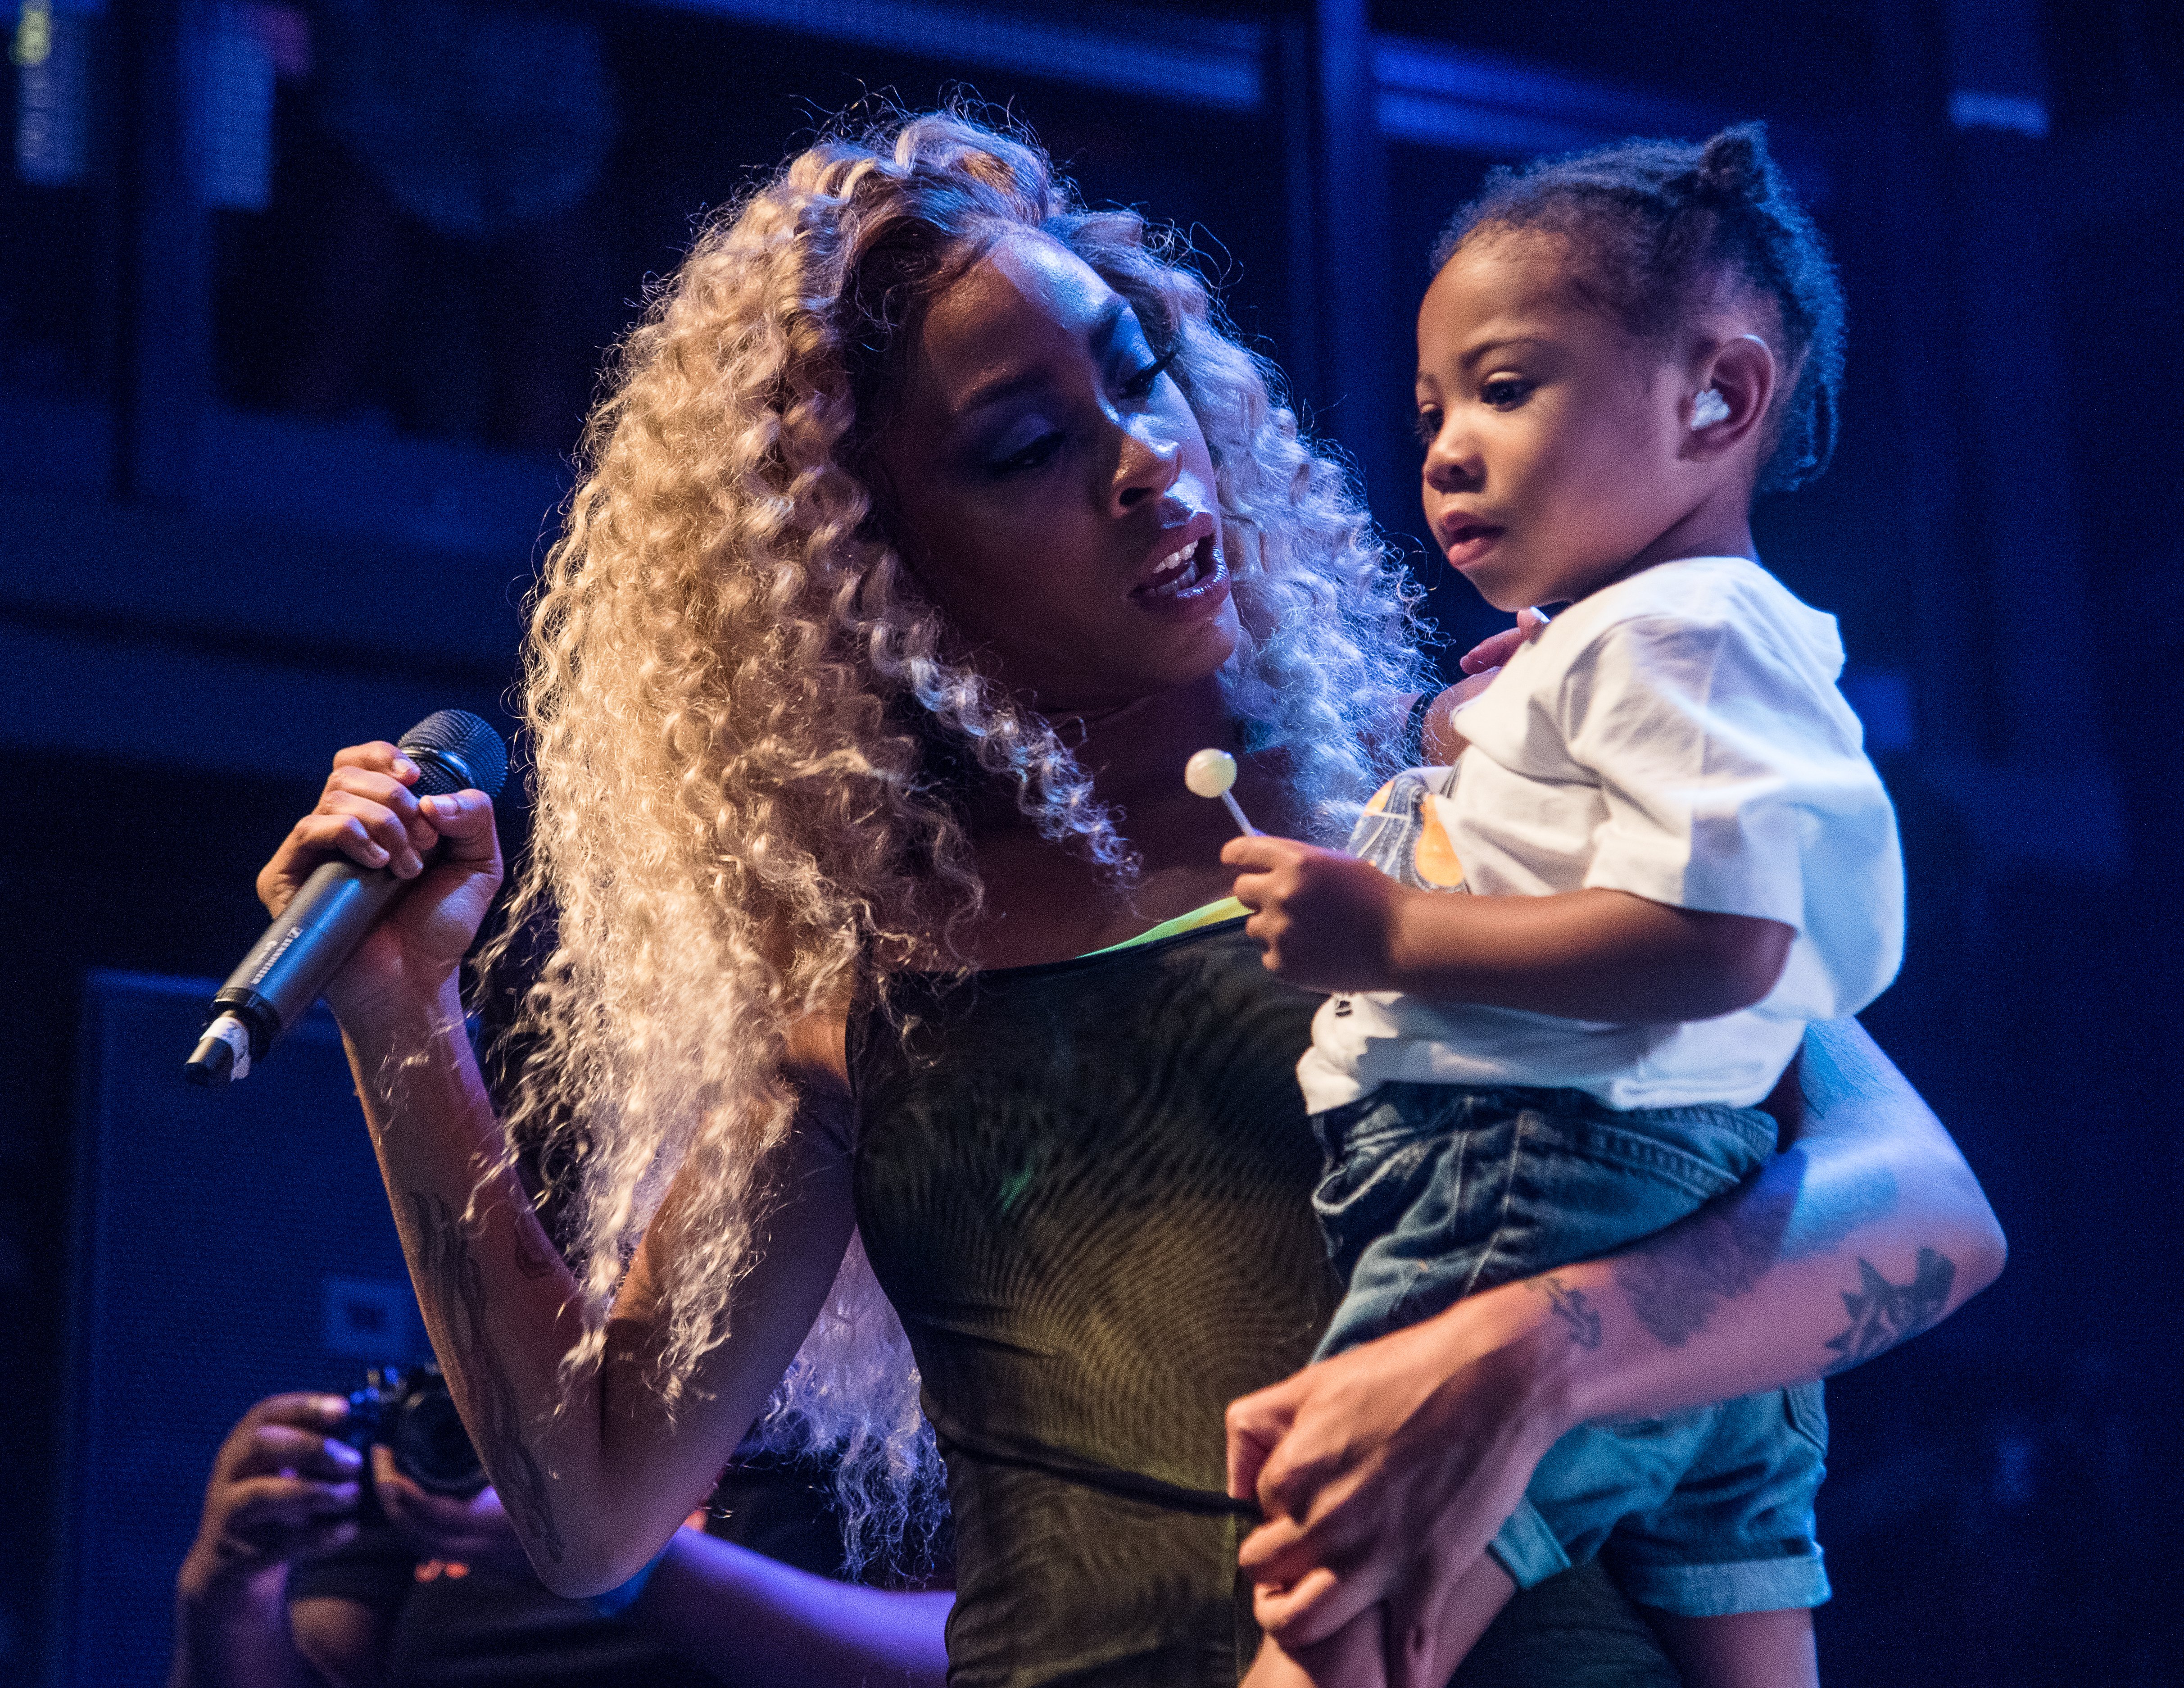 Rico Nasty on stage with her son at the Fillmore Silver Spring. in 2018. | Source: Getty Images